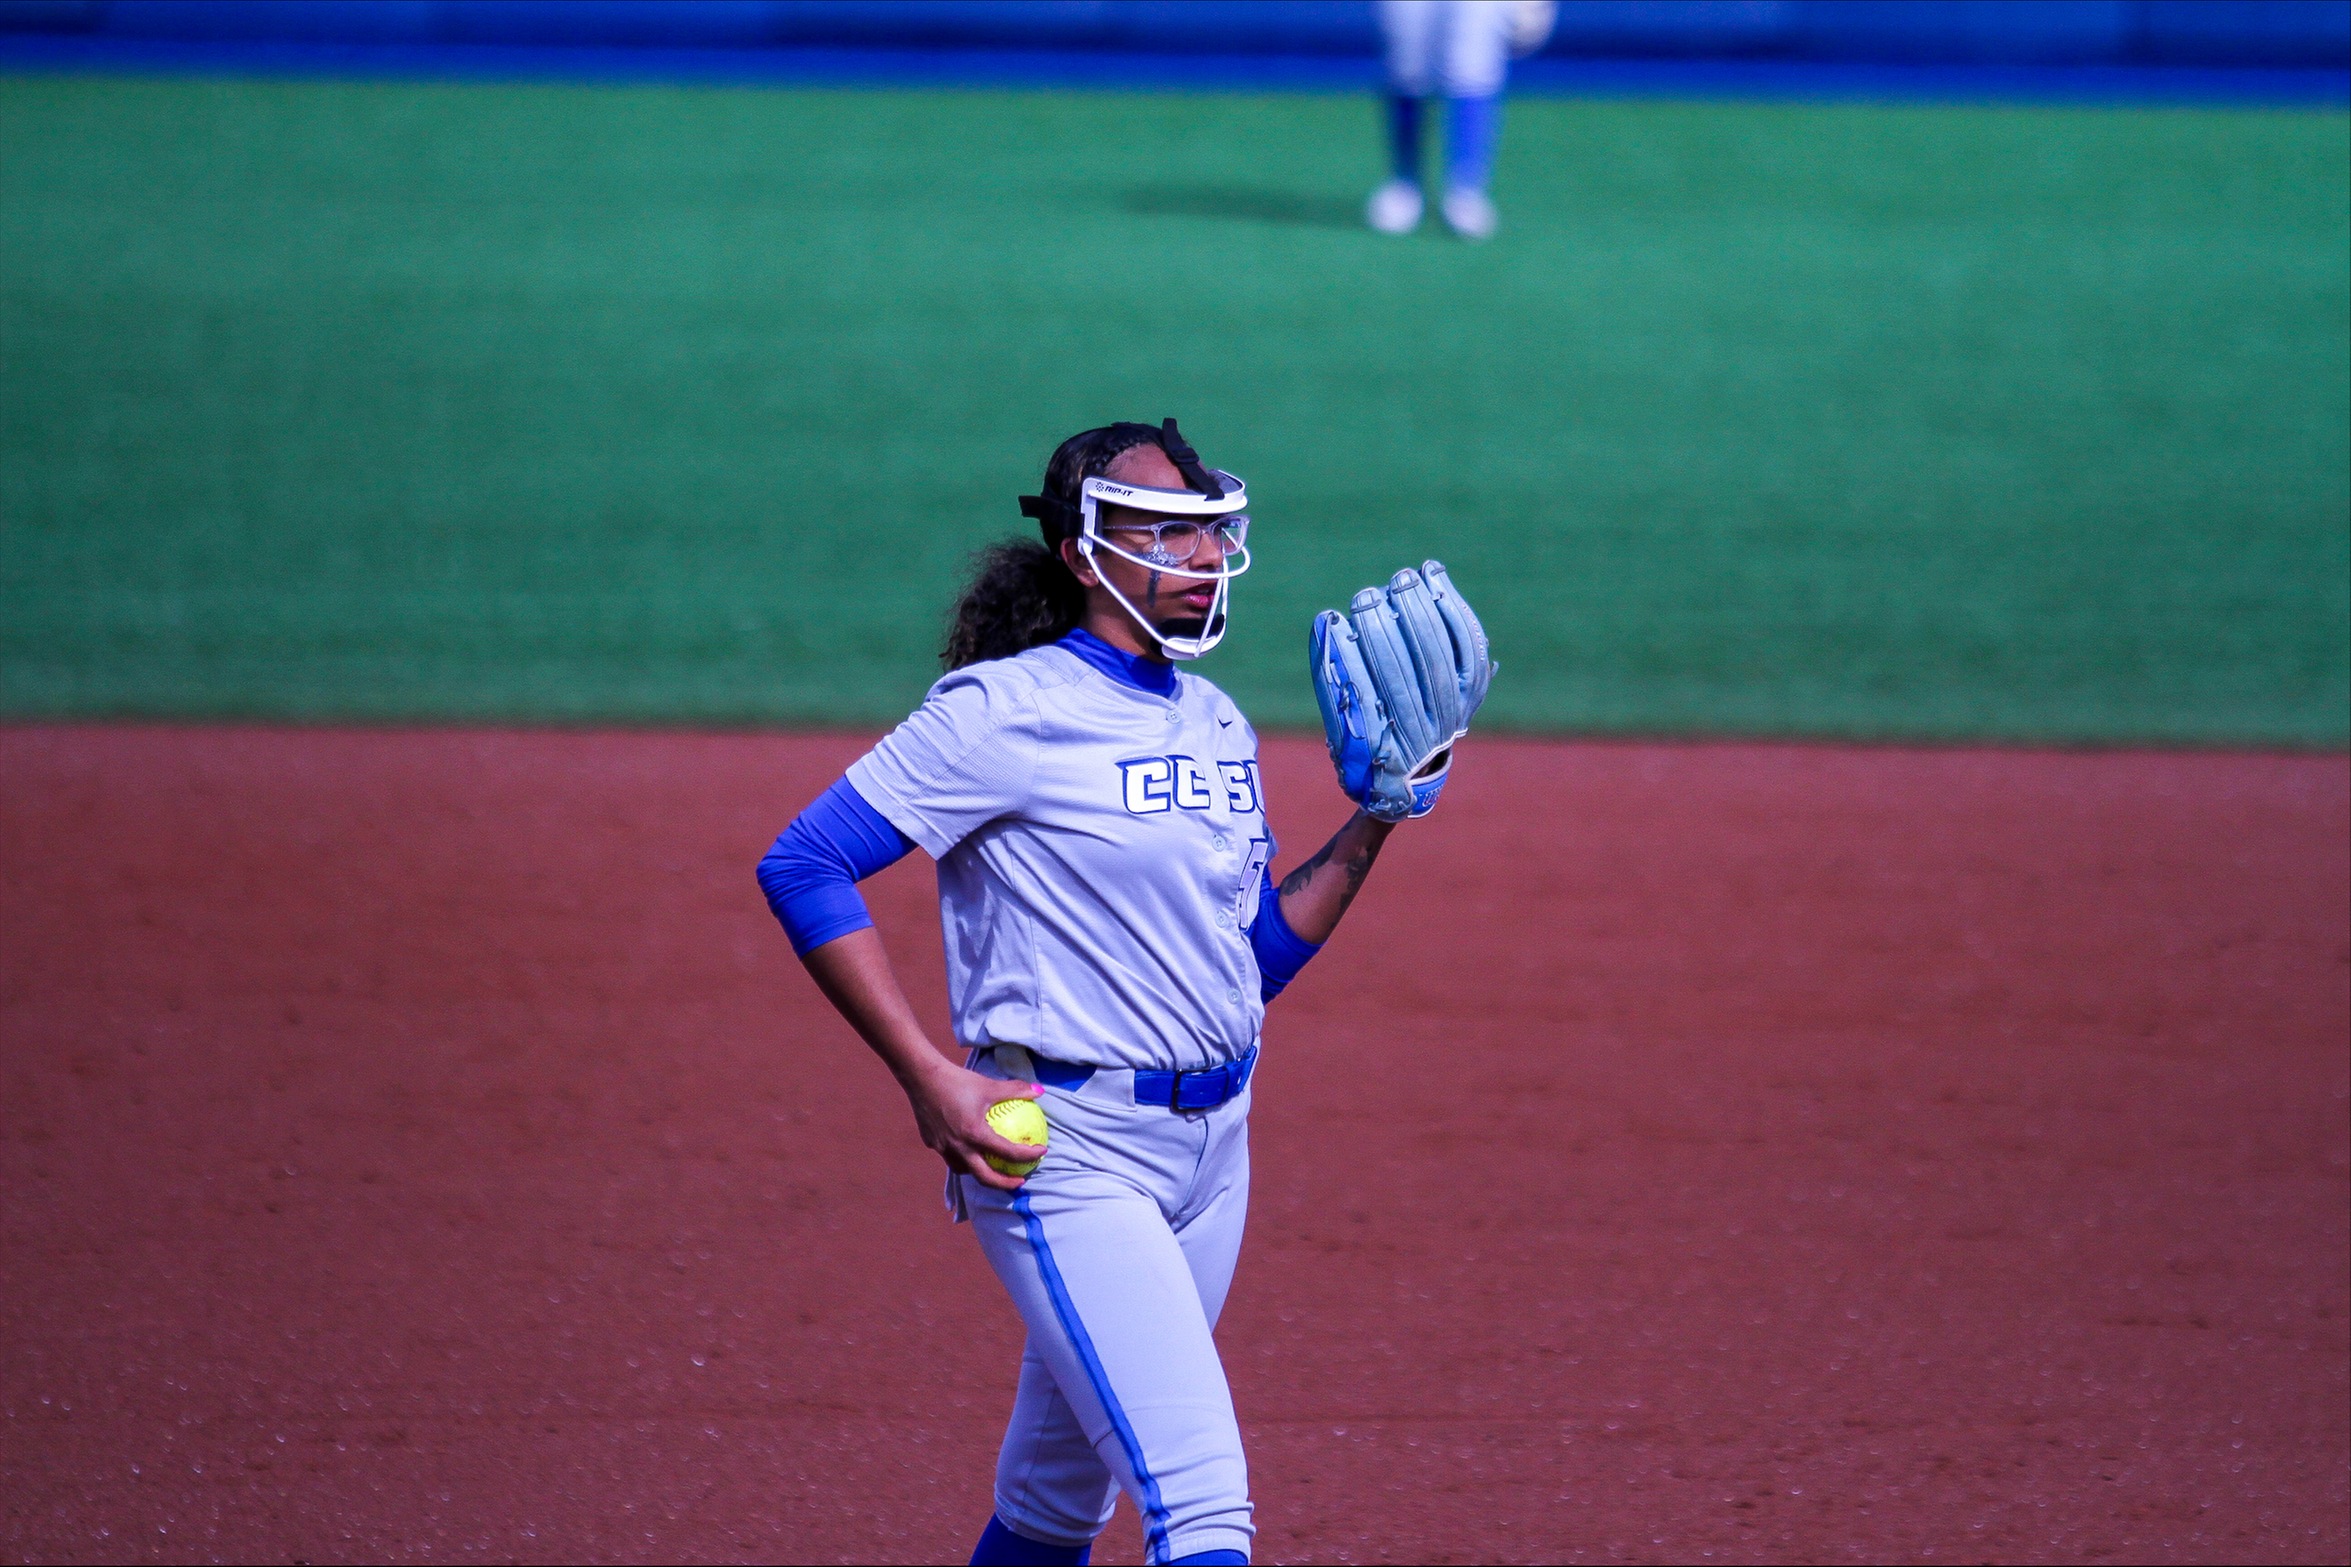 Softball Falls to in State Foe UConn on Tuesday